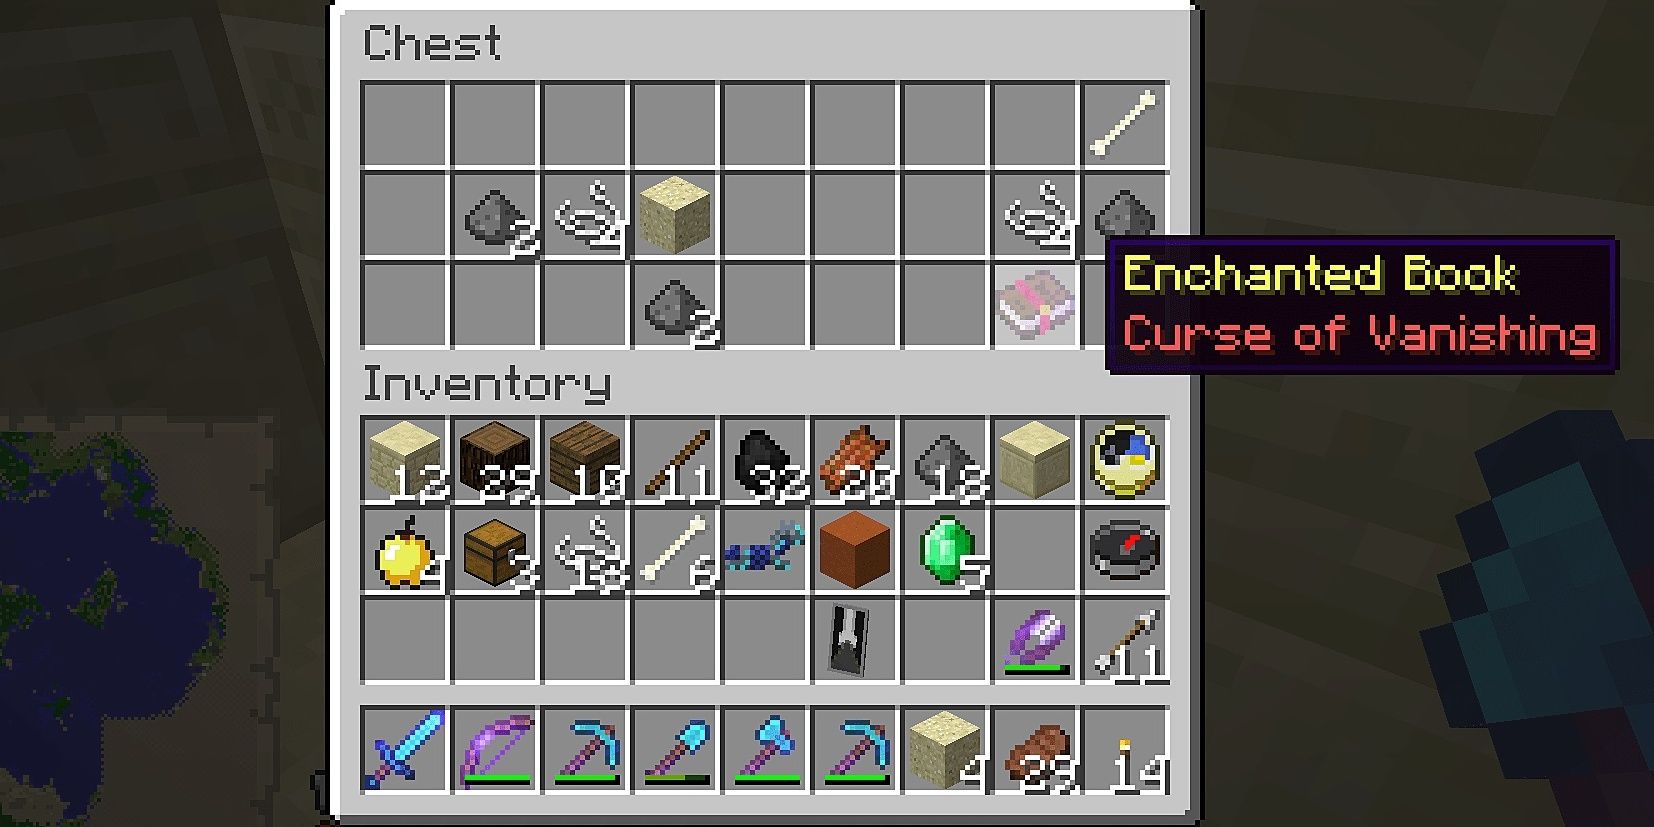 Curse Of Vanishing Enchantment Book can be used on a pickaxe in Minecraft